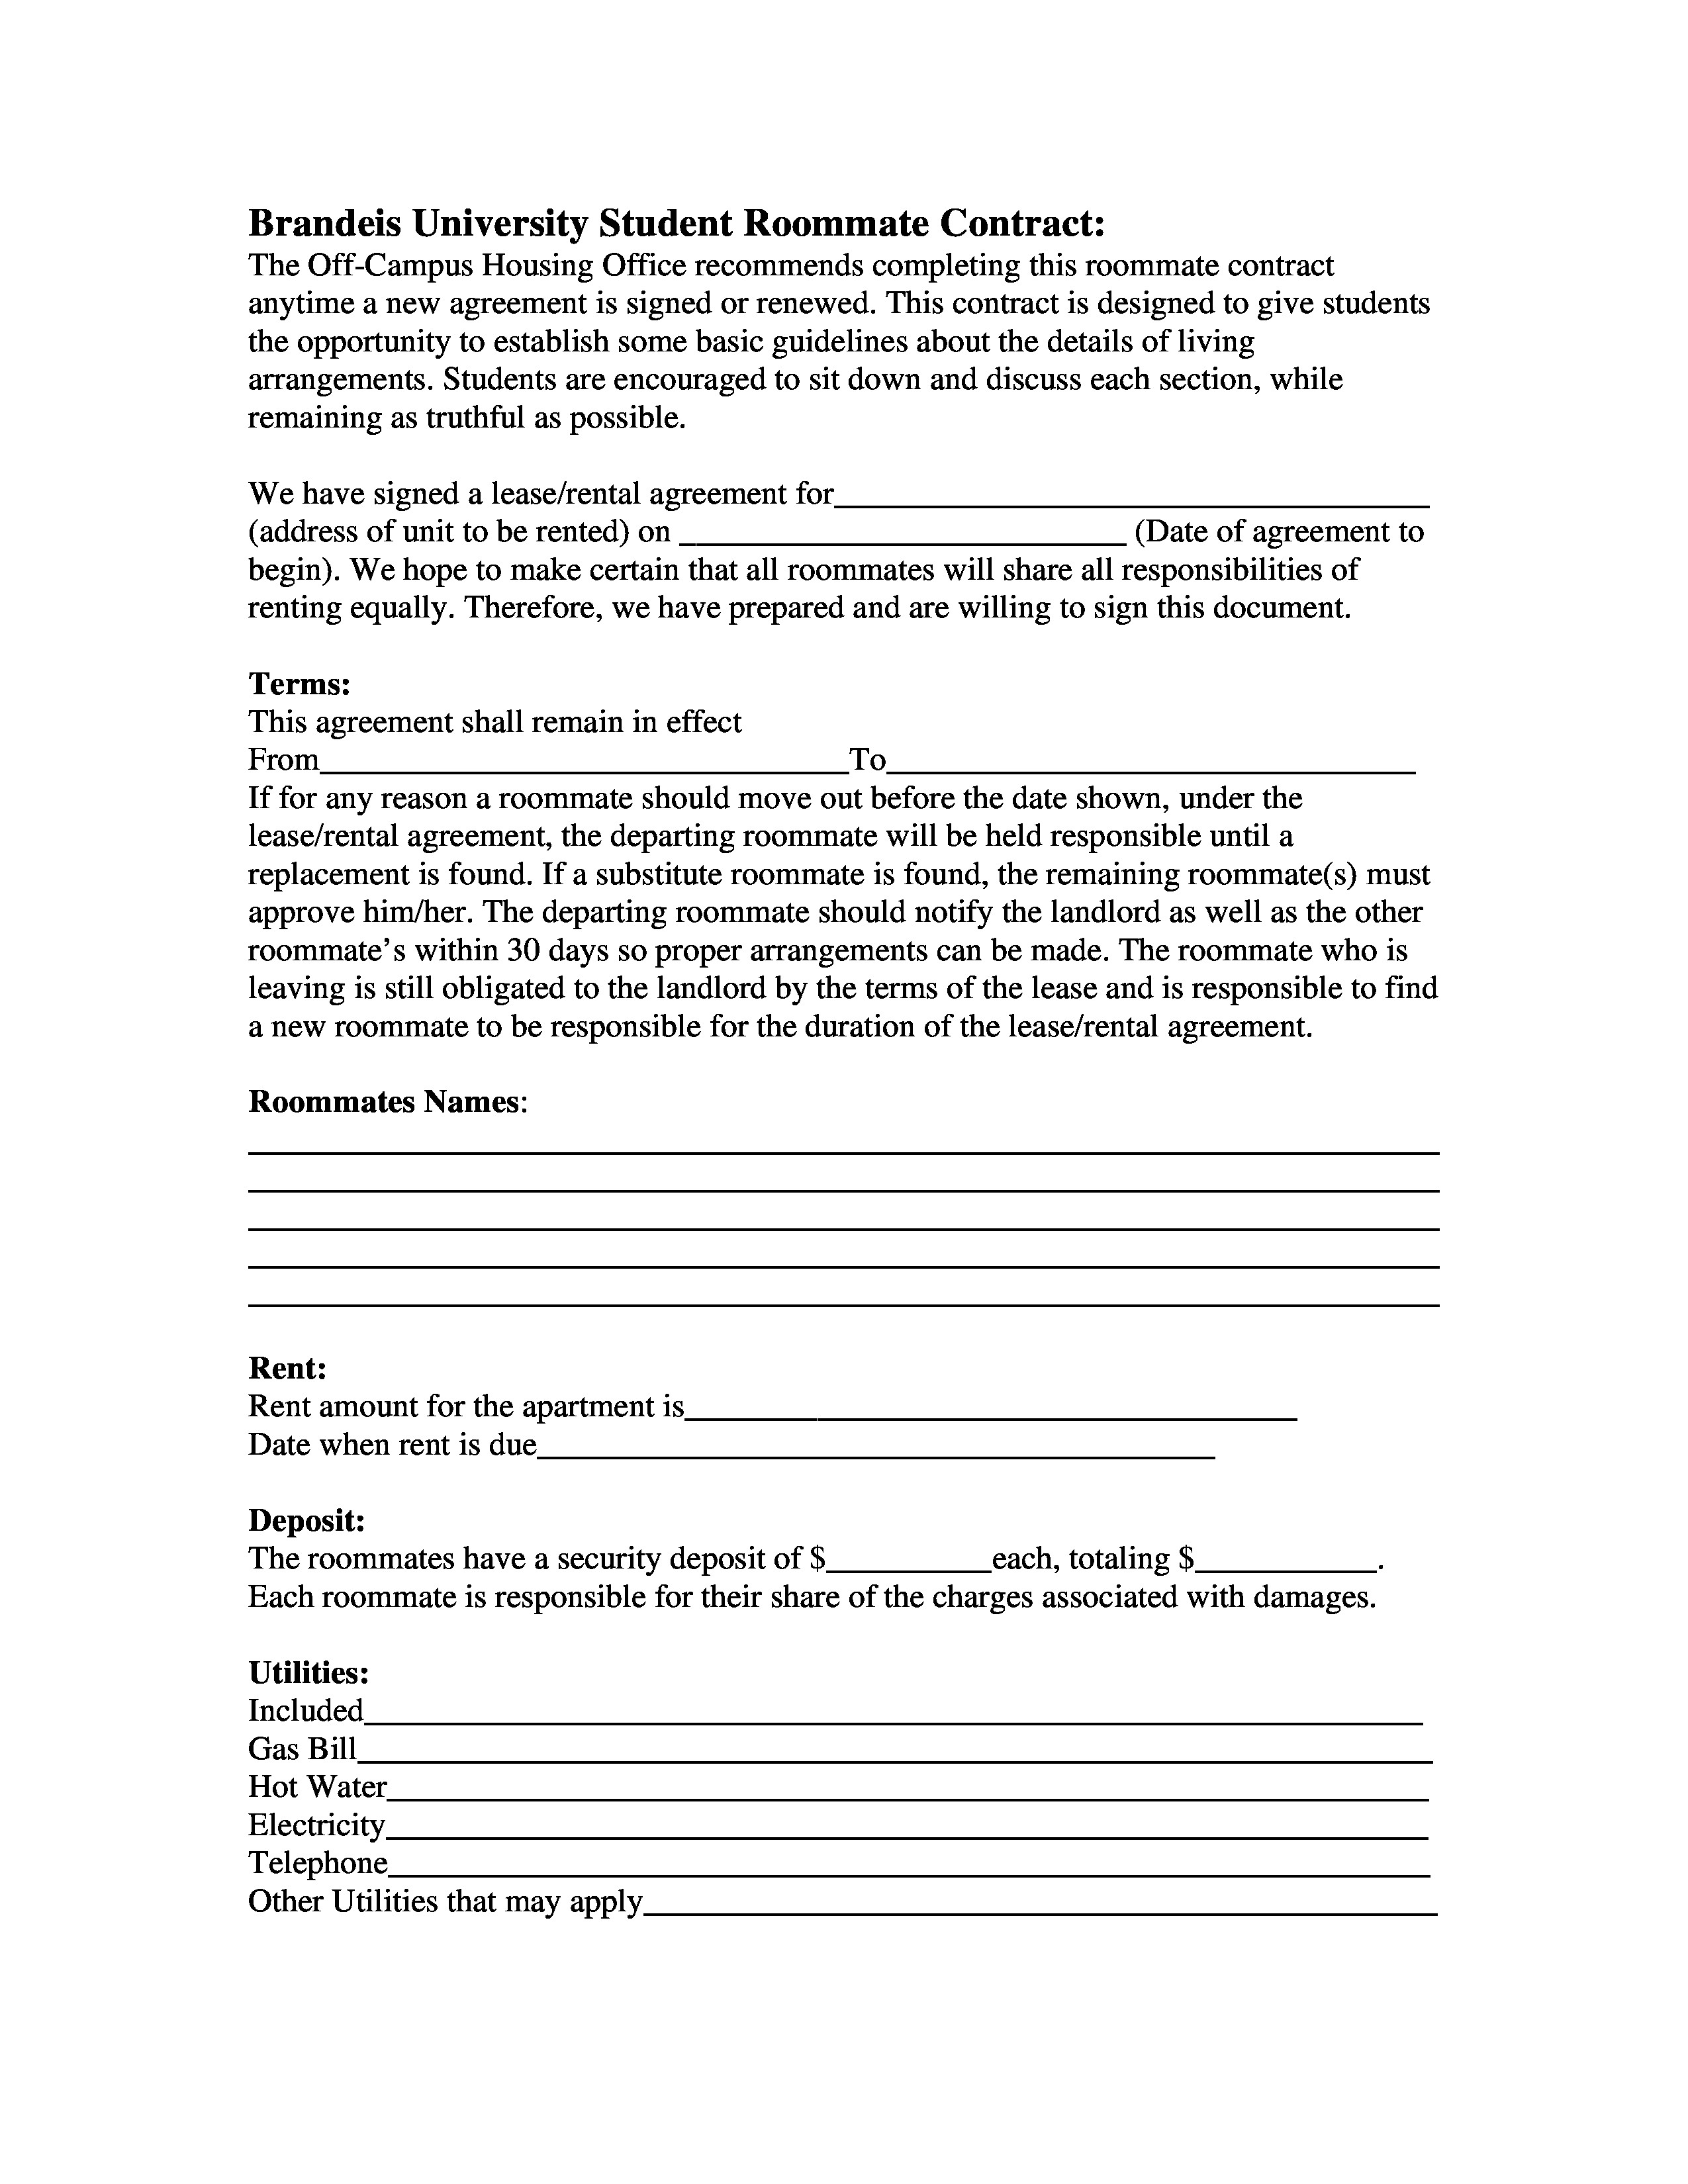 Free Basic University Student Roommate Contract Templates At Will Template